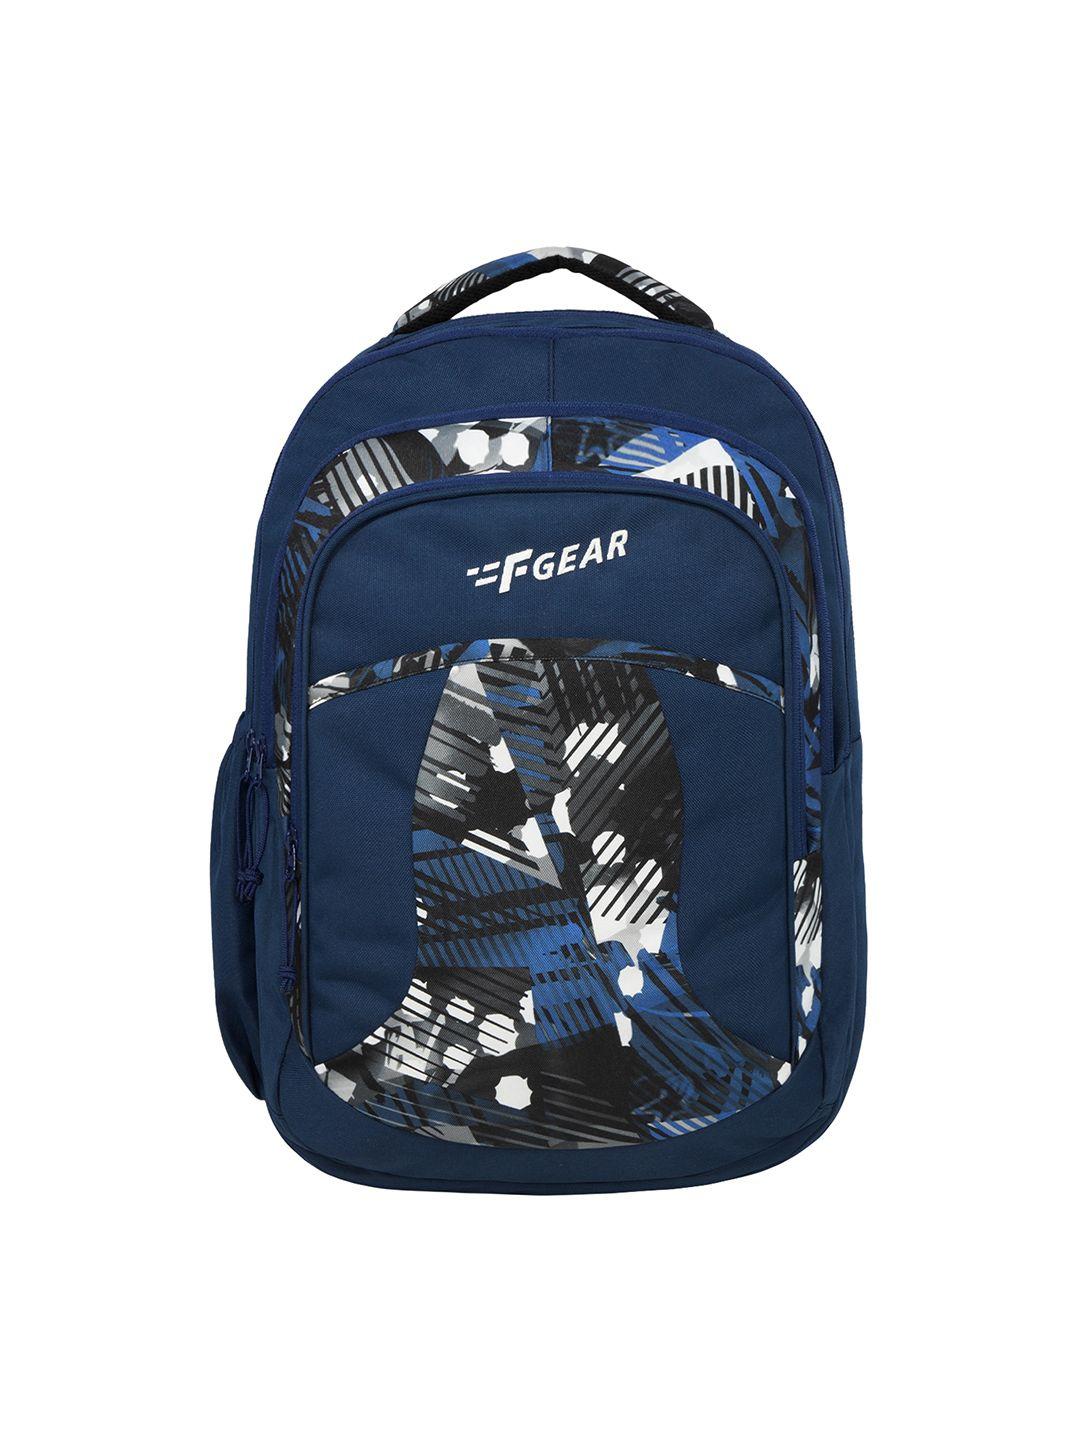 f gear unisex navy blue & white graphic contrast detail backpack